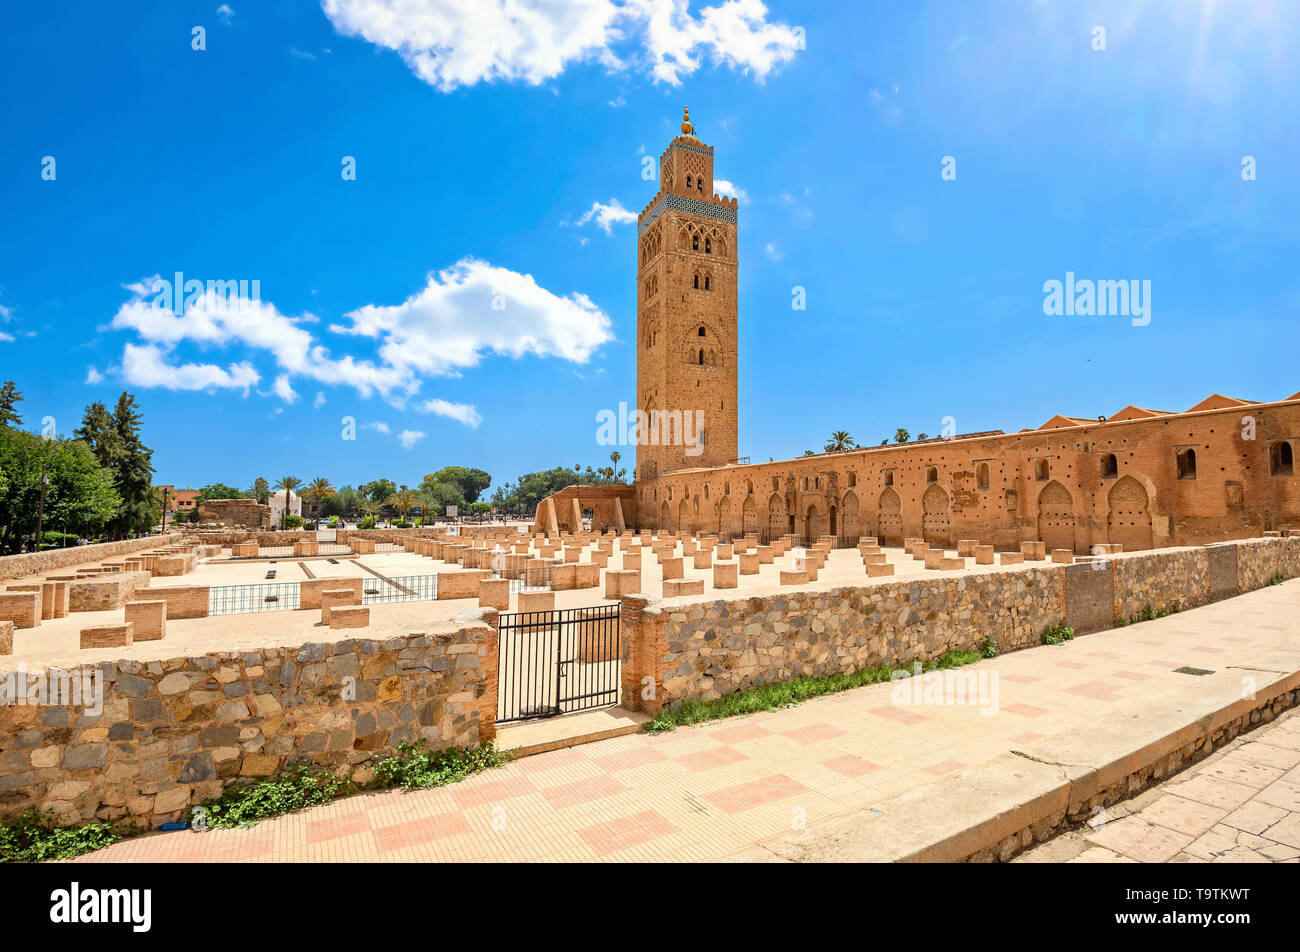 View of mosque with minaret Koutoubia, (Kutubiyya Mosque) in Marrakesh. Morocco, North Africa Stock Photo